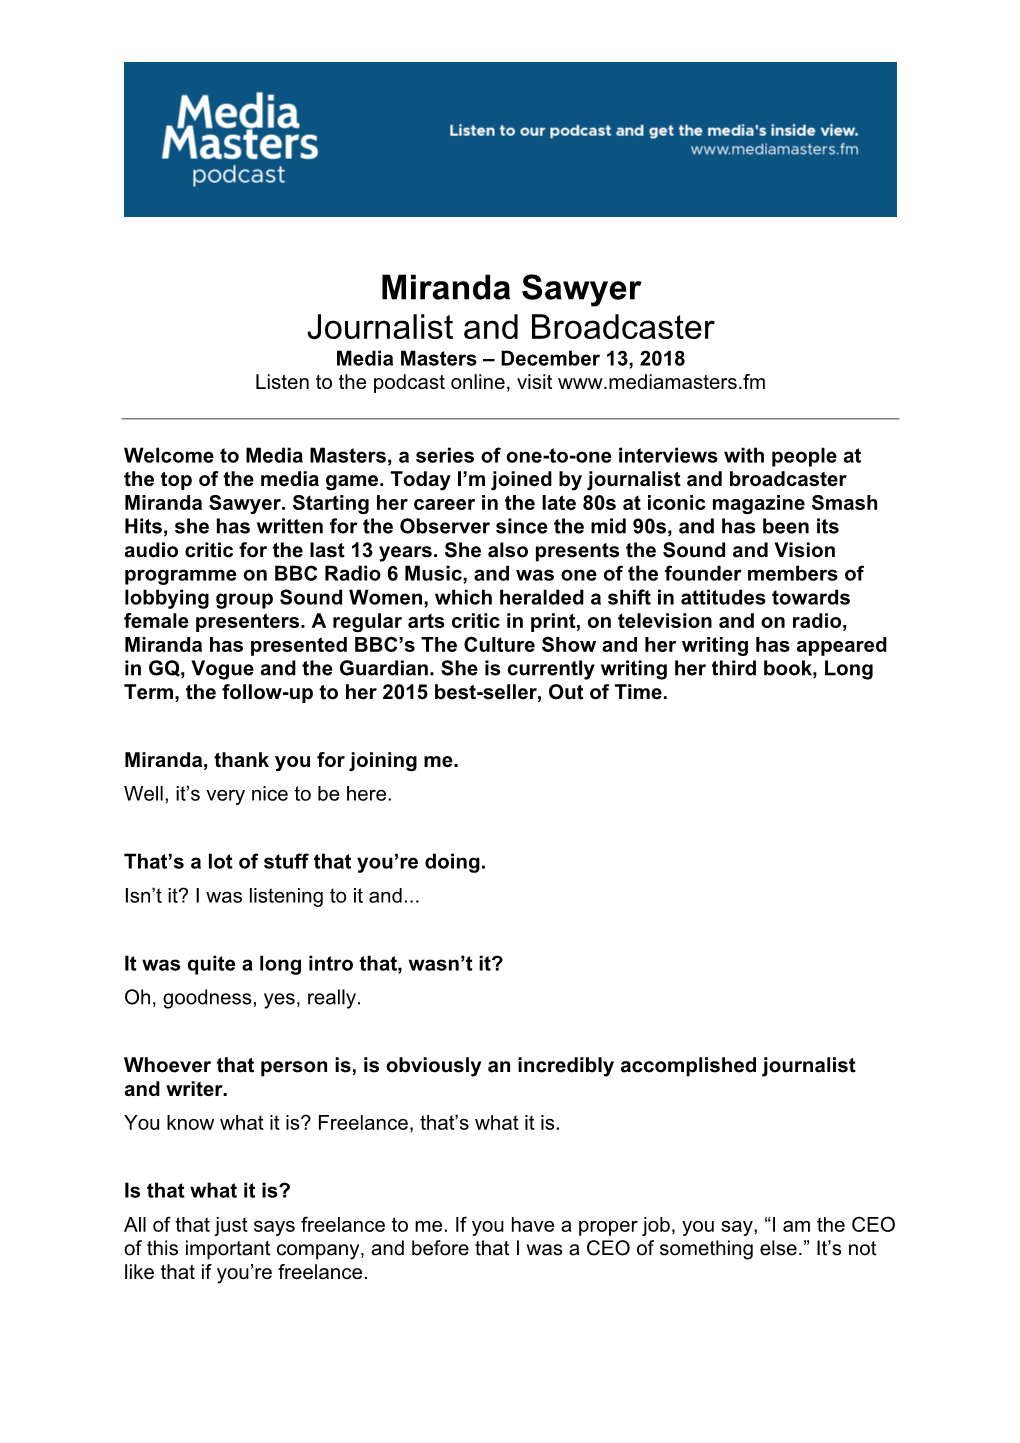 Miranda Sawyer Journalist and Broadcaster Media Masters – December 13, 2018 Listen to the Podcast Online, Visit